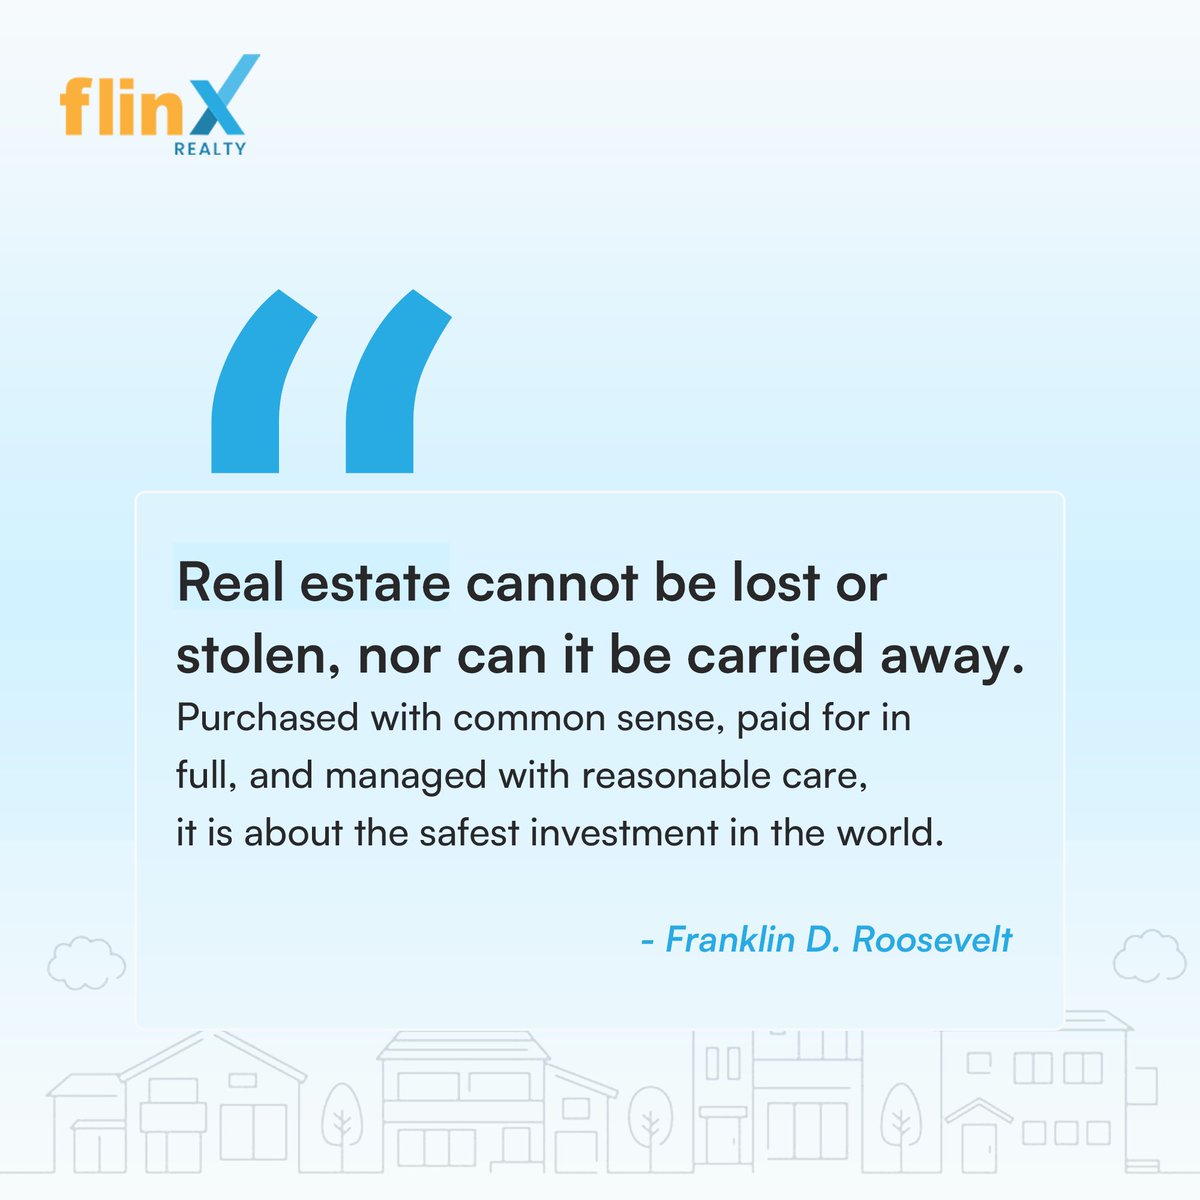 Looking for an investment that guarantees peace of mind with zero risk? Real estate is the answer. Send us a DM to start living stress-free while your money works for you. #safeinvestment #flinxrealty